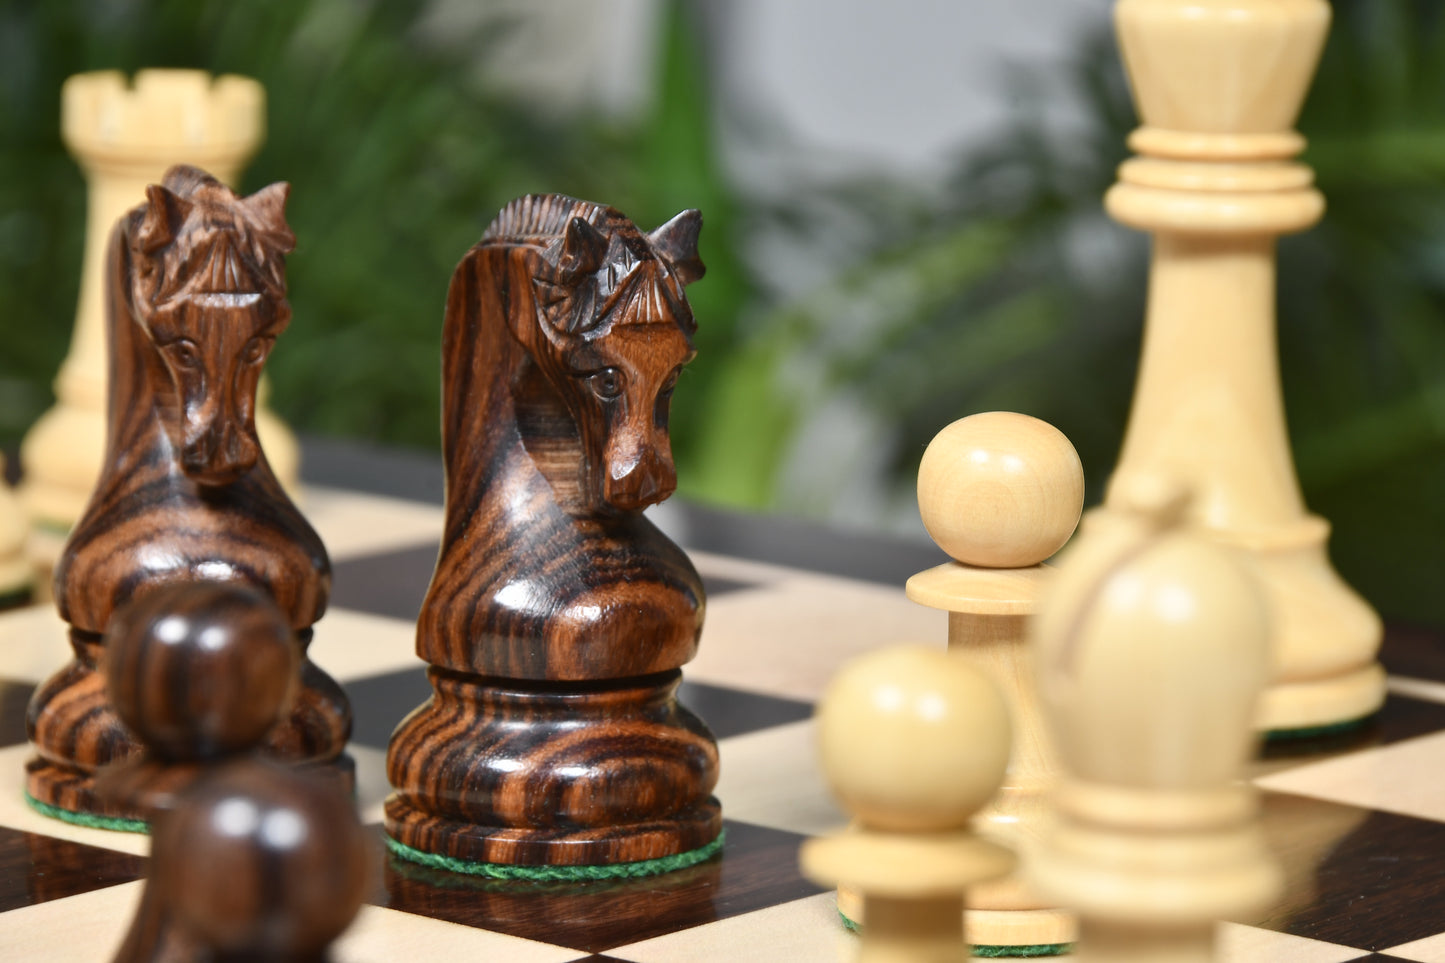 The Leningrad Club-Sized Wooden Chess Pieces in Indian Rosewood & Boxwood- 4.0" King